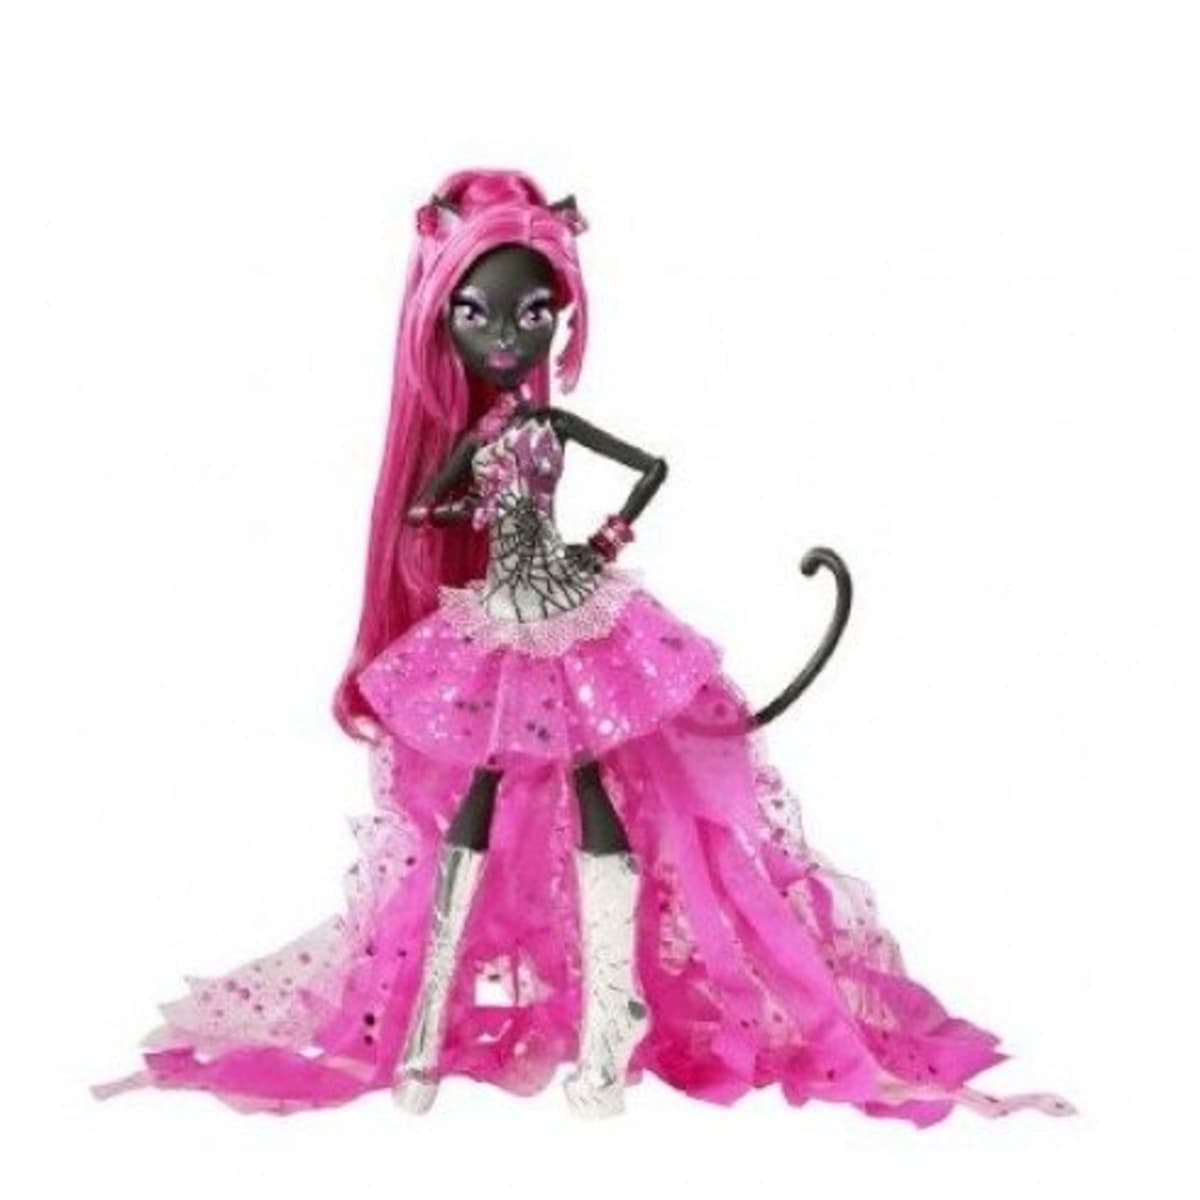 A Guide to Monster High Dolls